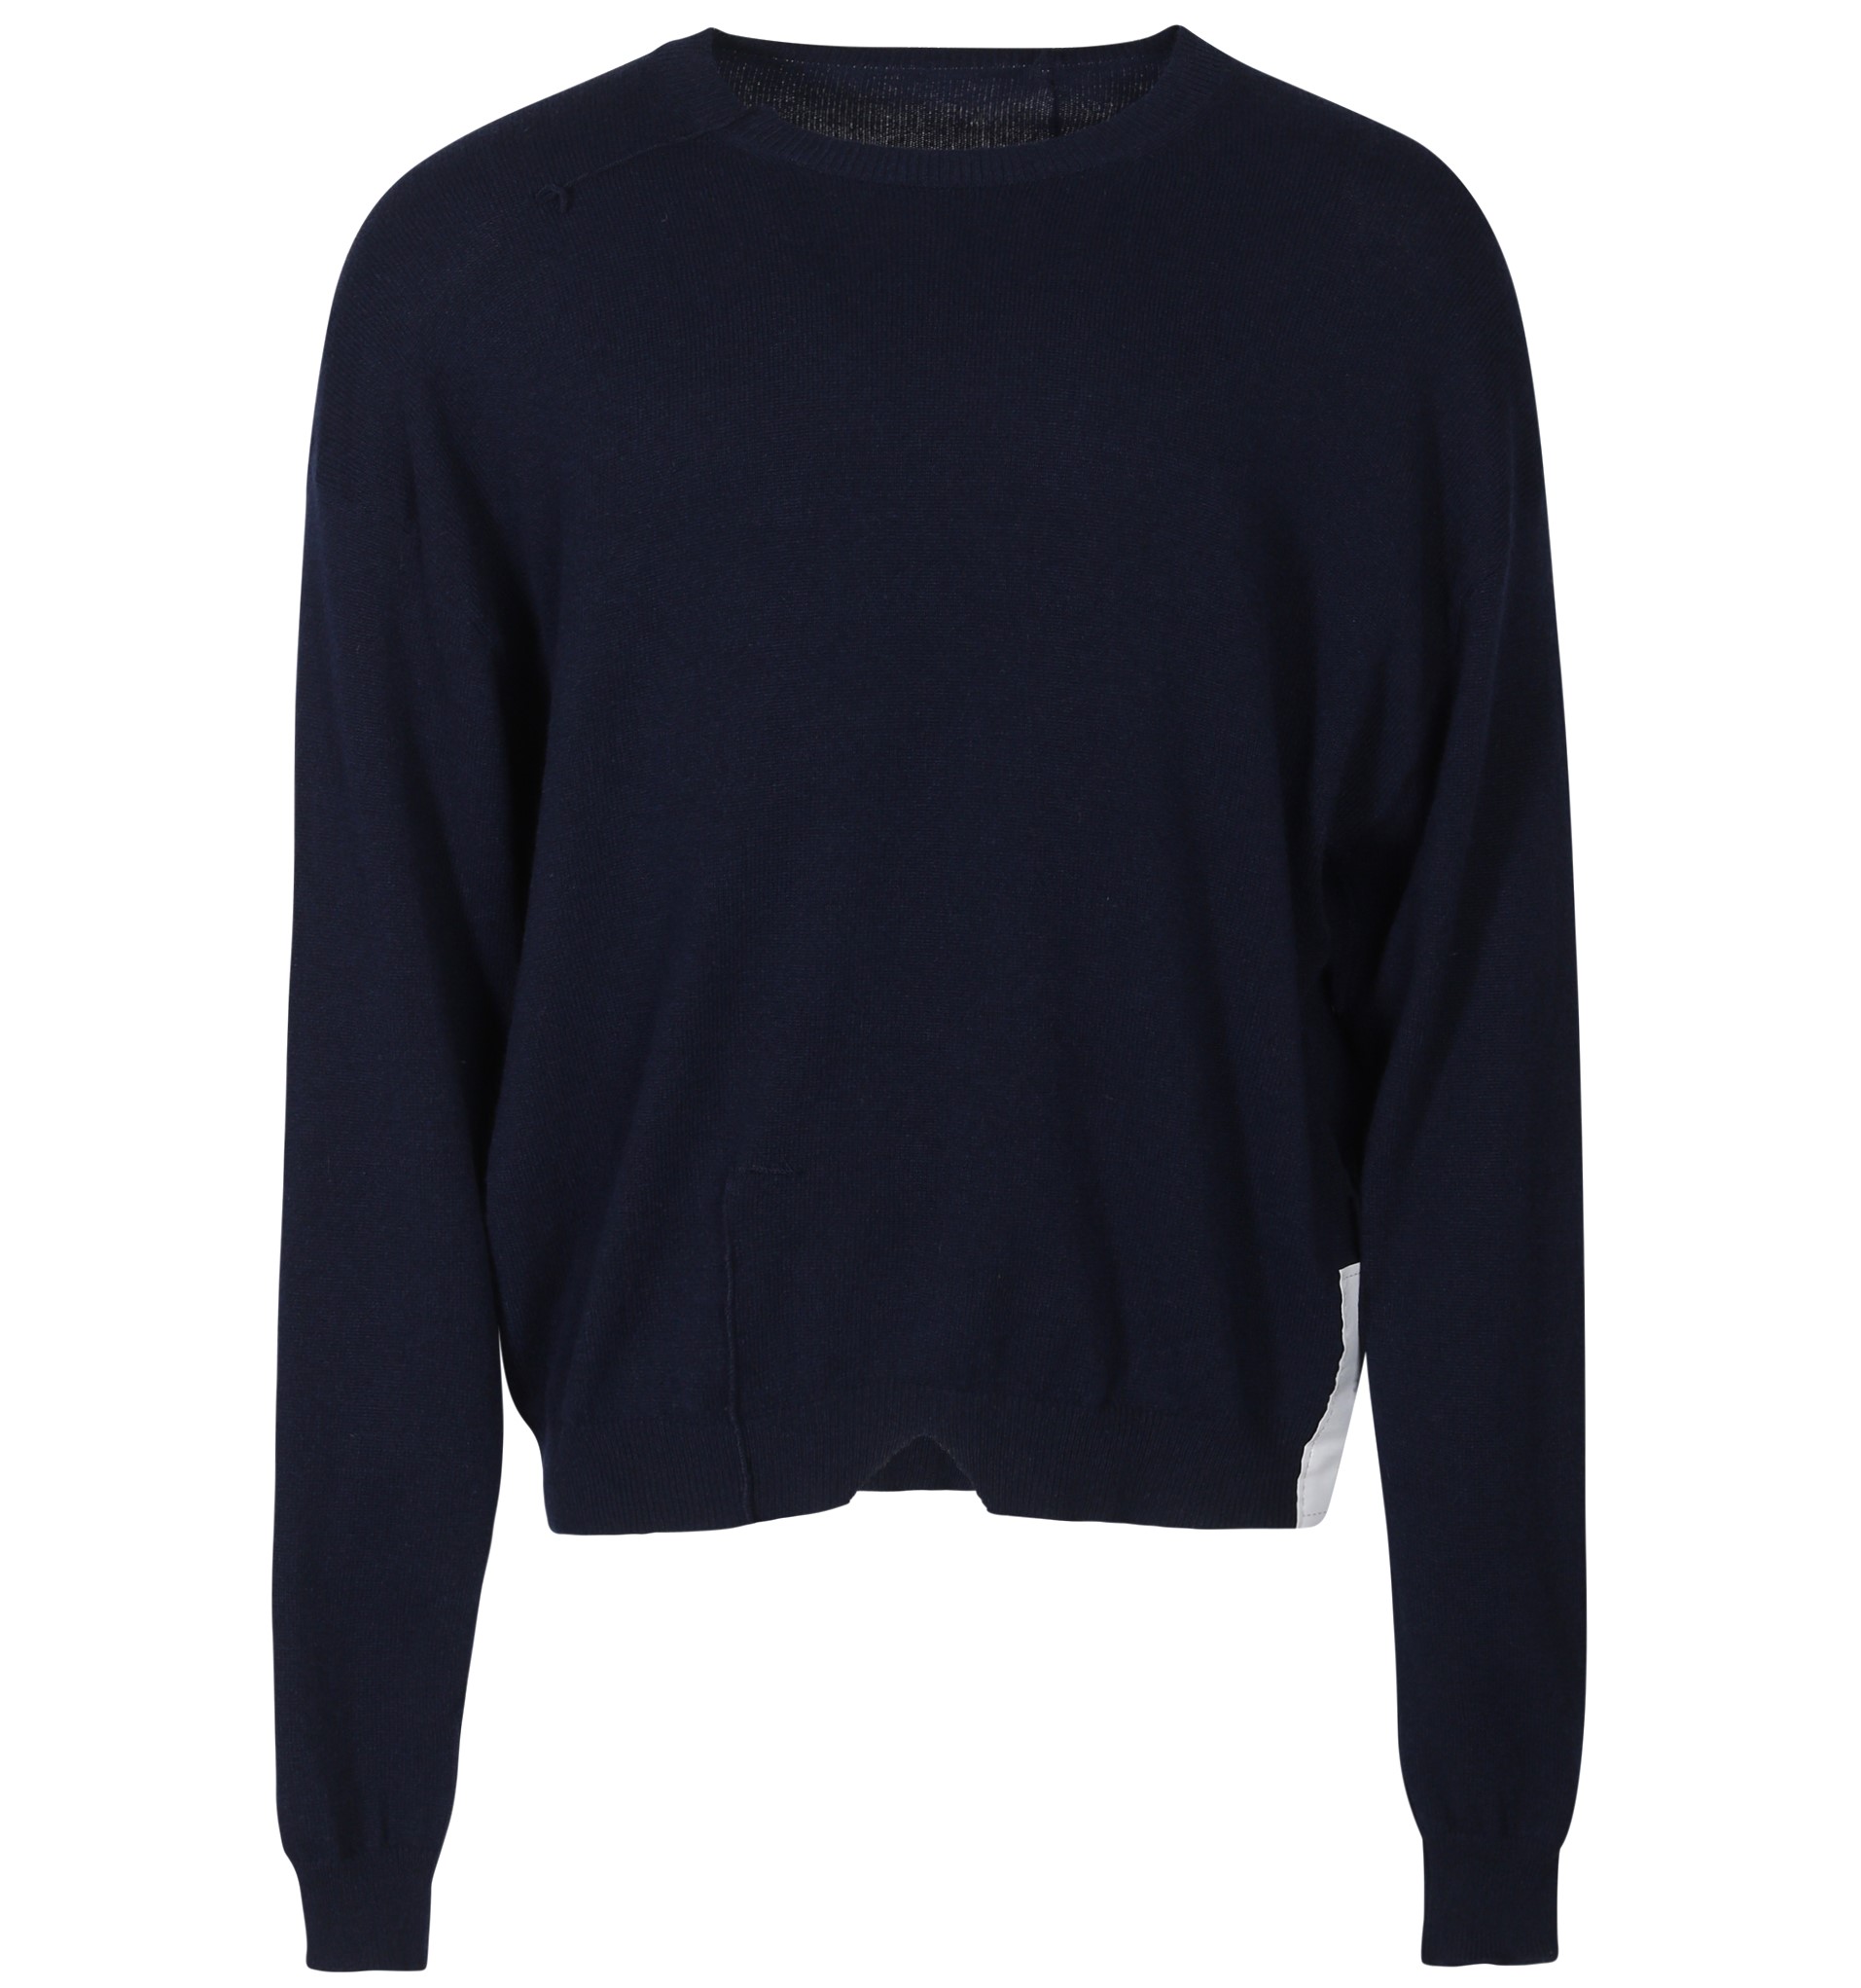 RAMAEL Infinity Cashmere Sweater in Navy